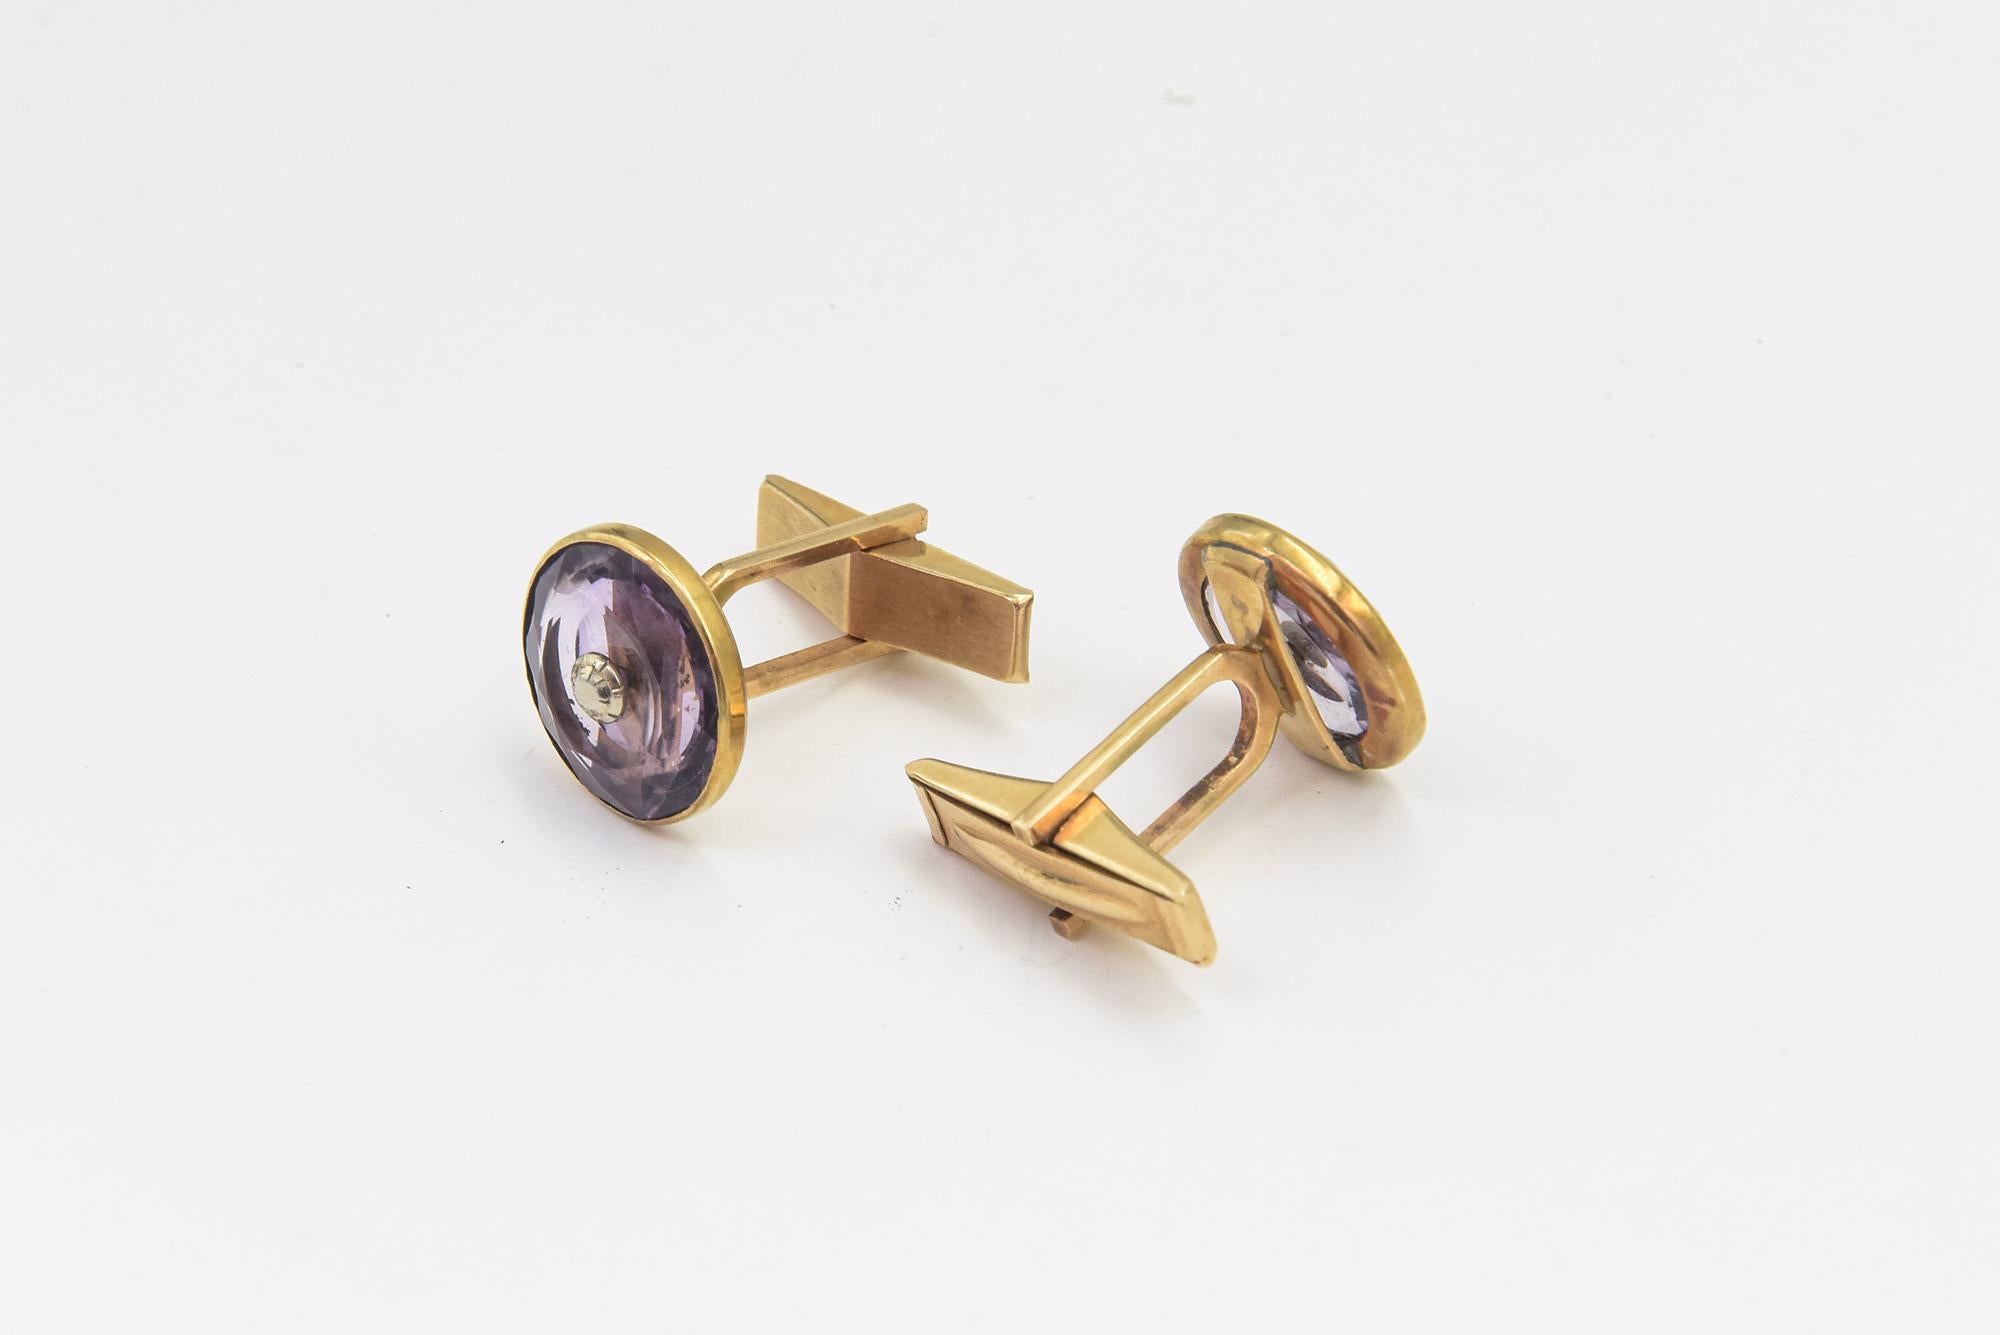 Antique Arts & Crafts Amethyst and Gold Cufflinks For Sale 5